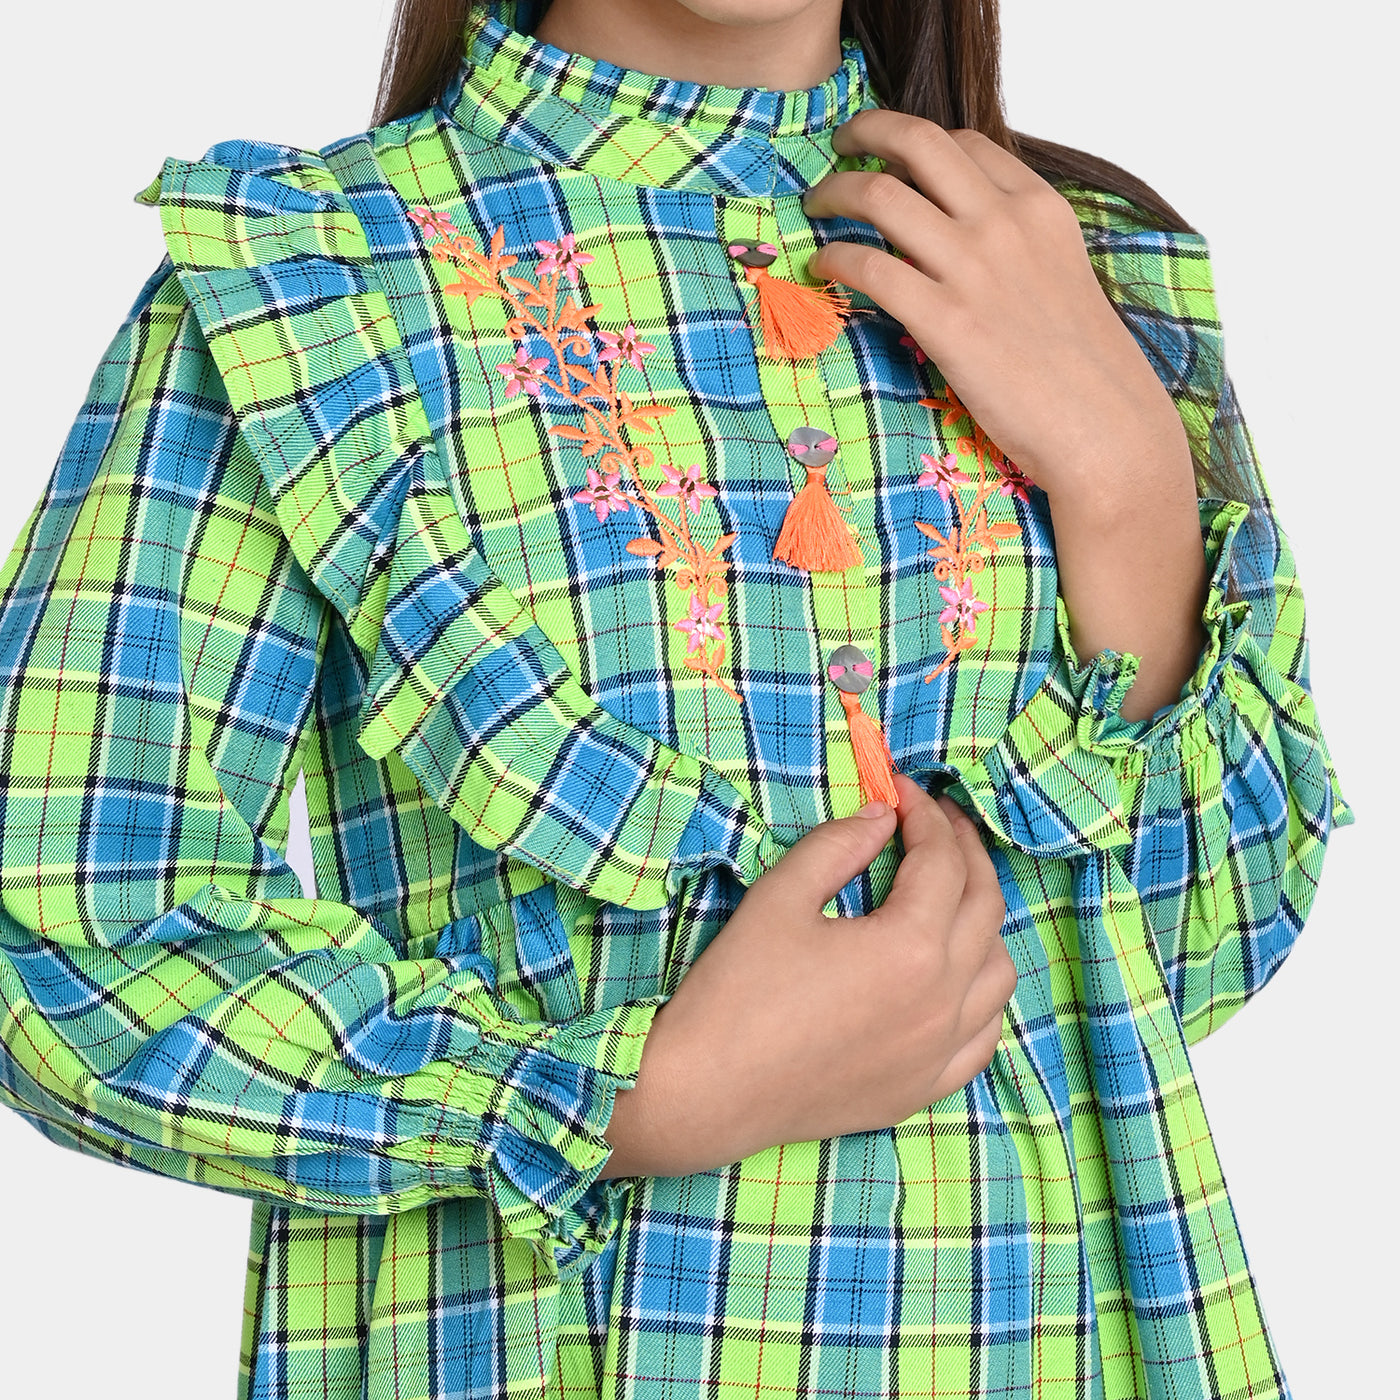 Girls Yard Embroidered Top Shoq Case-Green Check